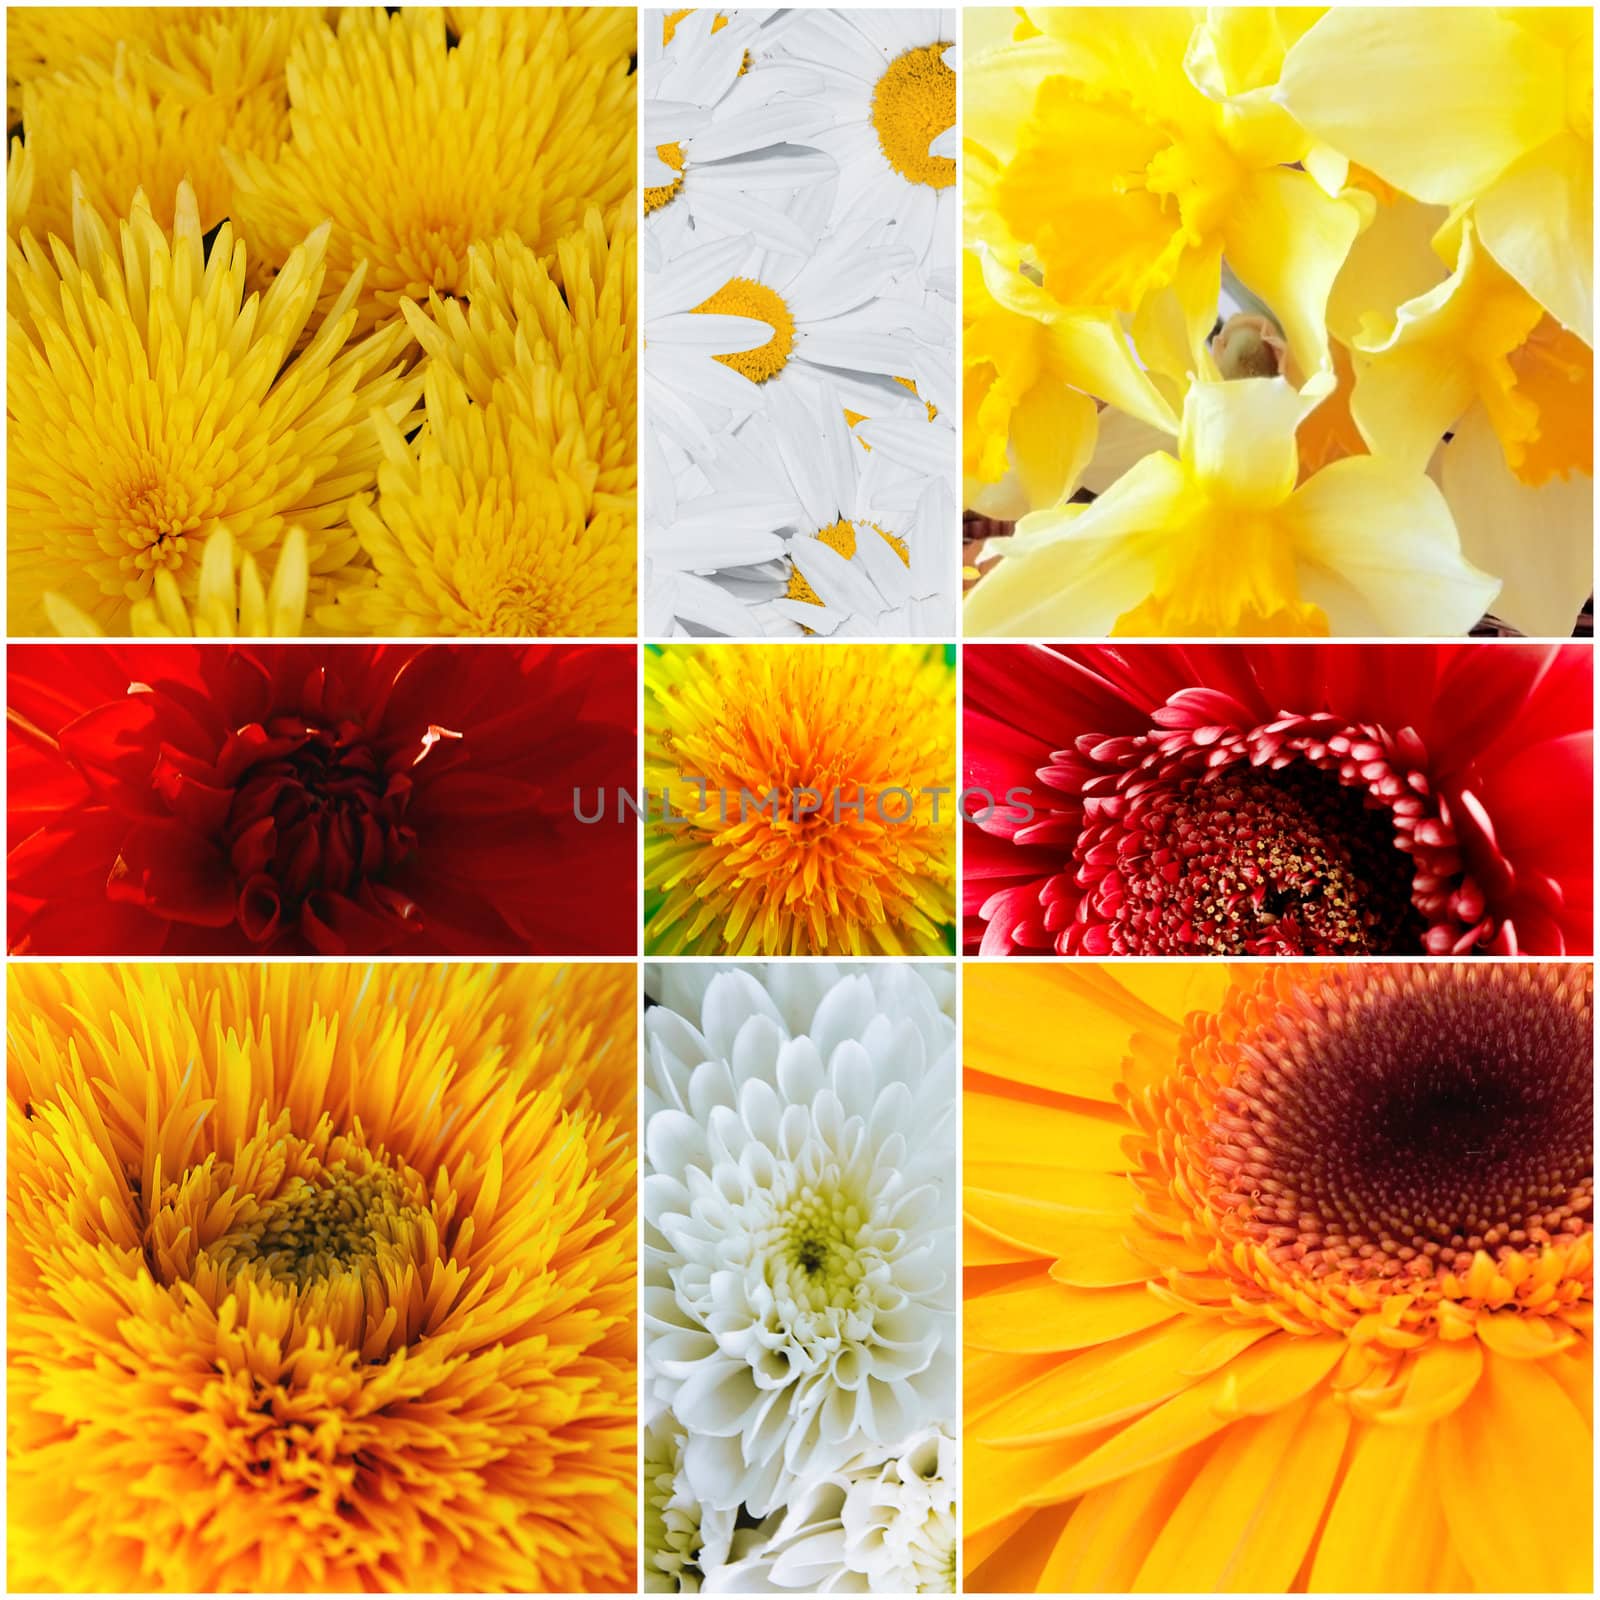 Yellow and red petals of gentle flowers by Serp